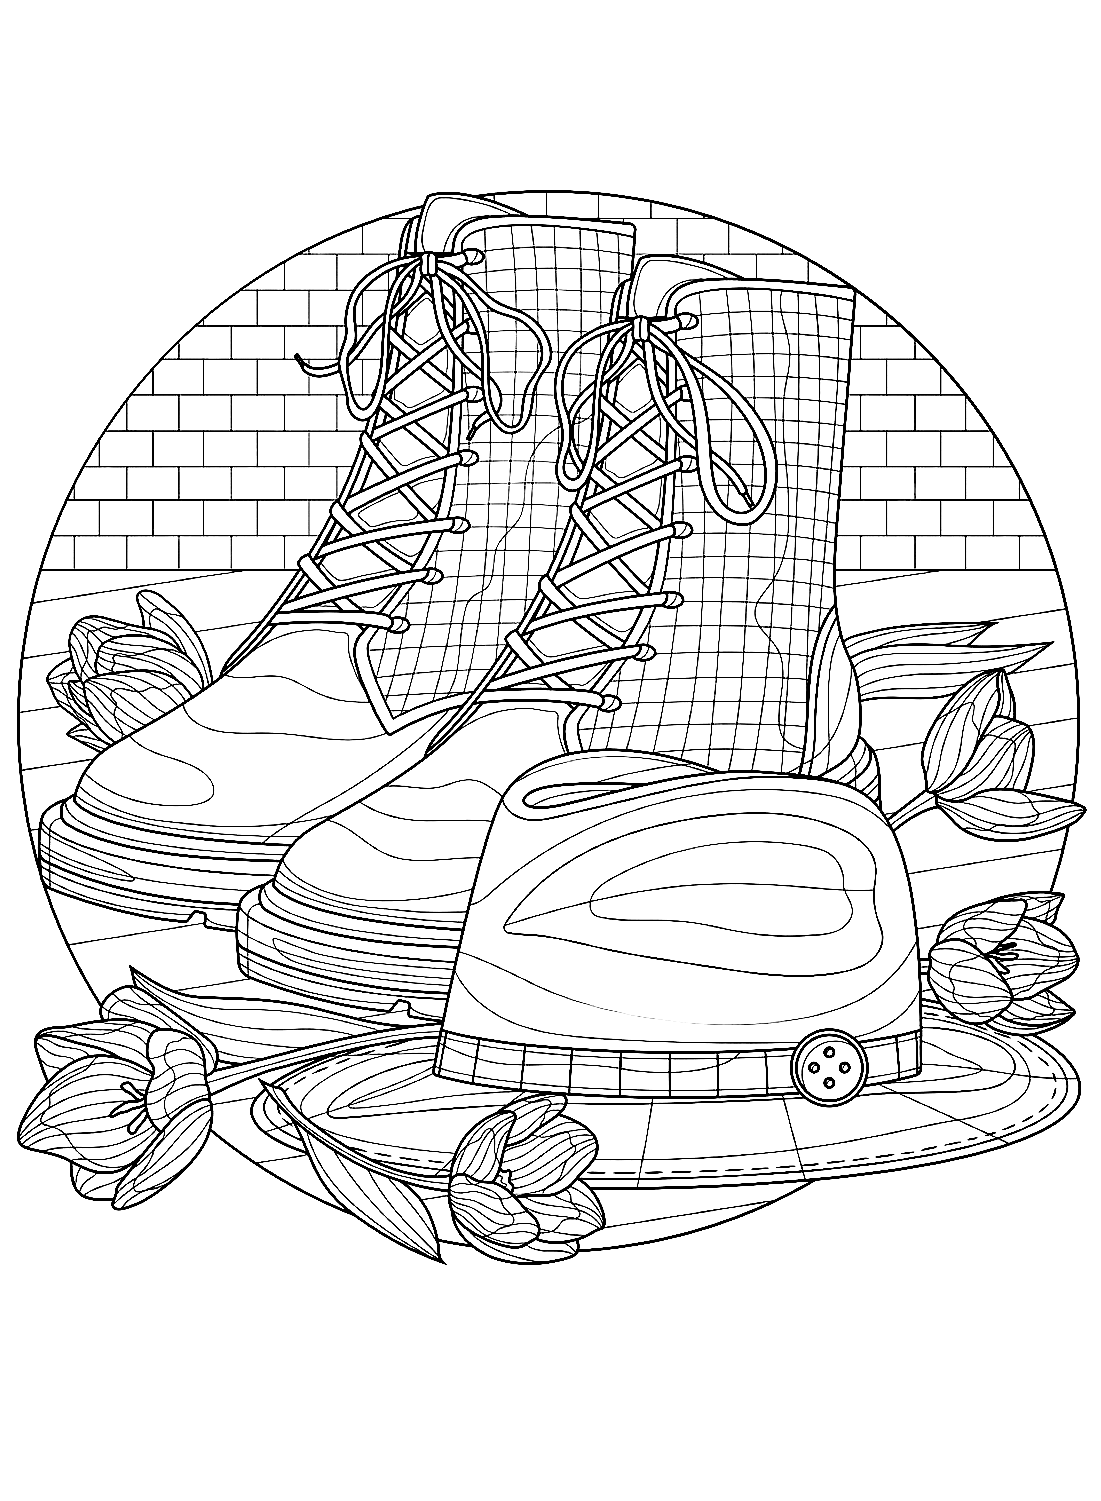 Boot Coloring Sheet for Kids